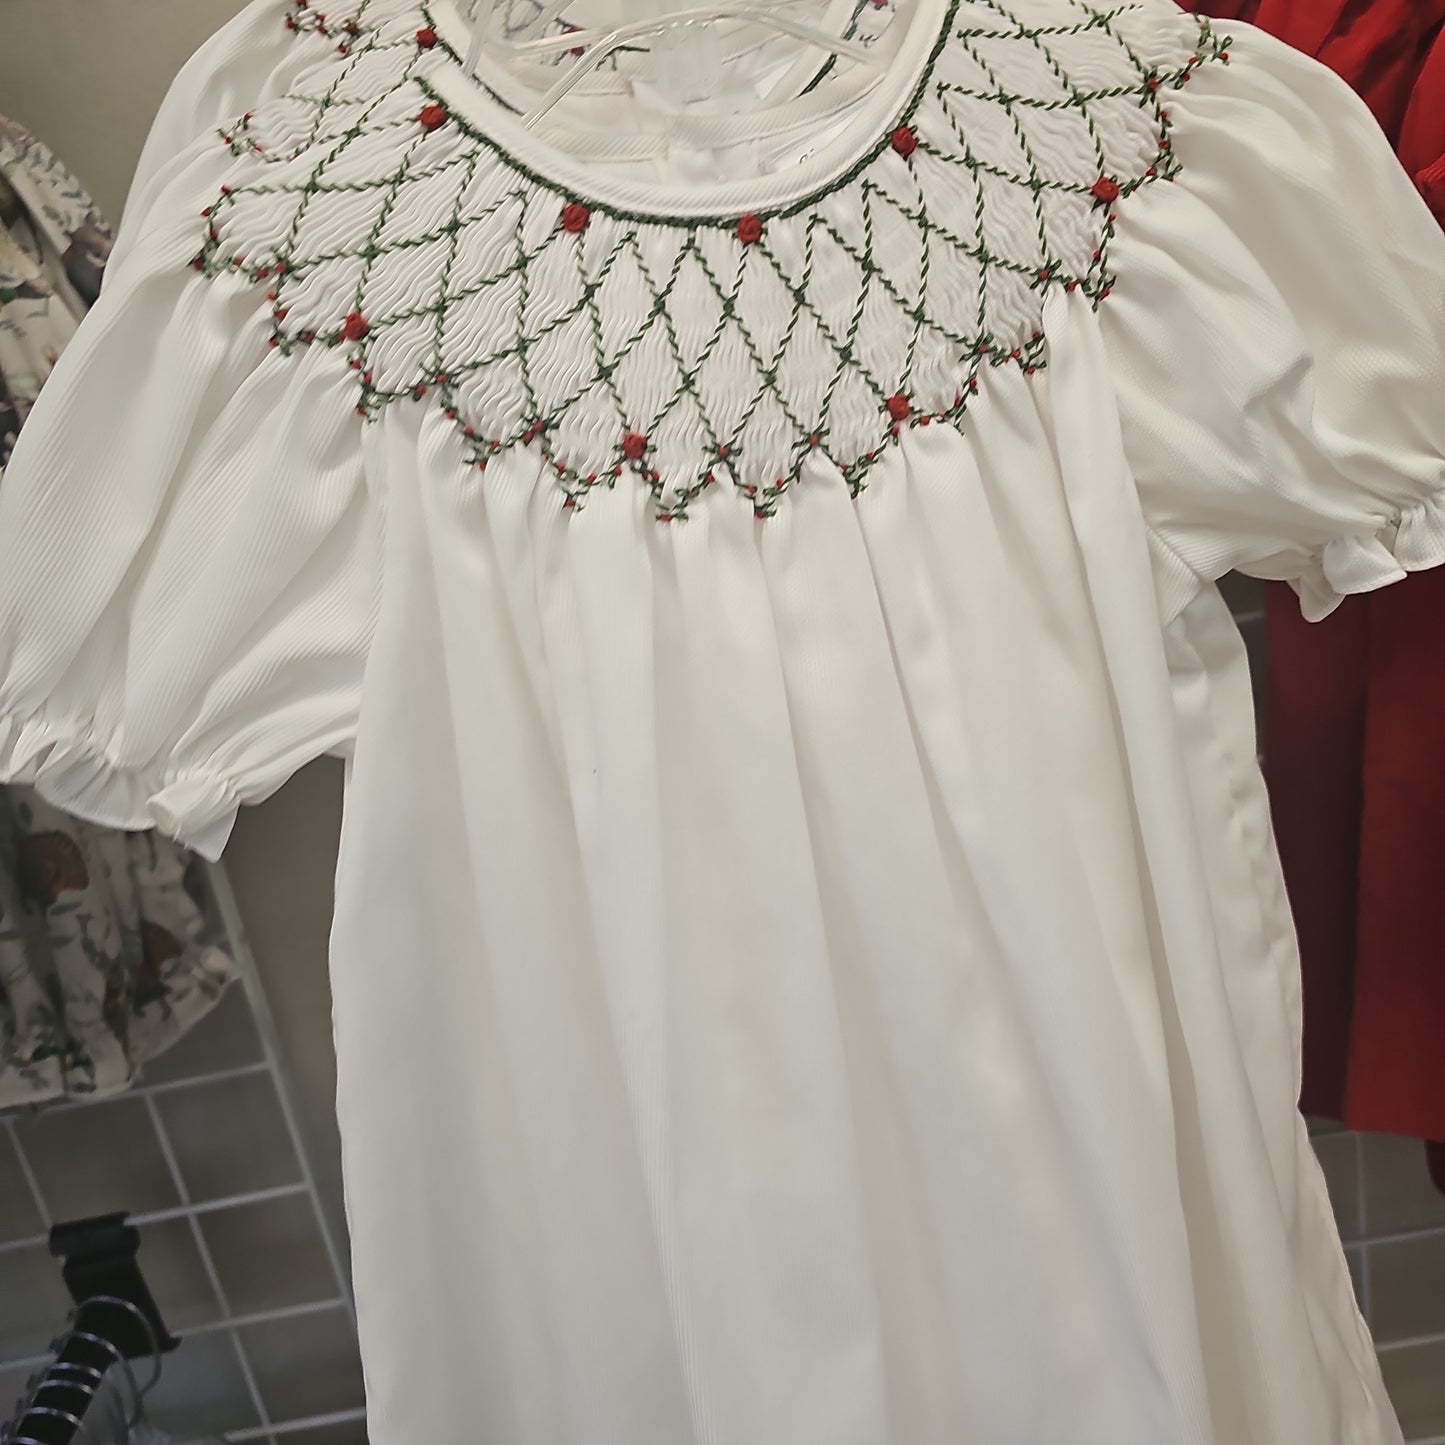 White Smocked Girl's Dress  Bishop Style with Green and Red Accents